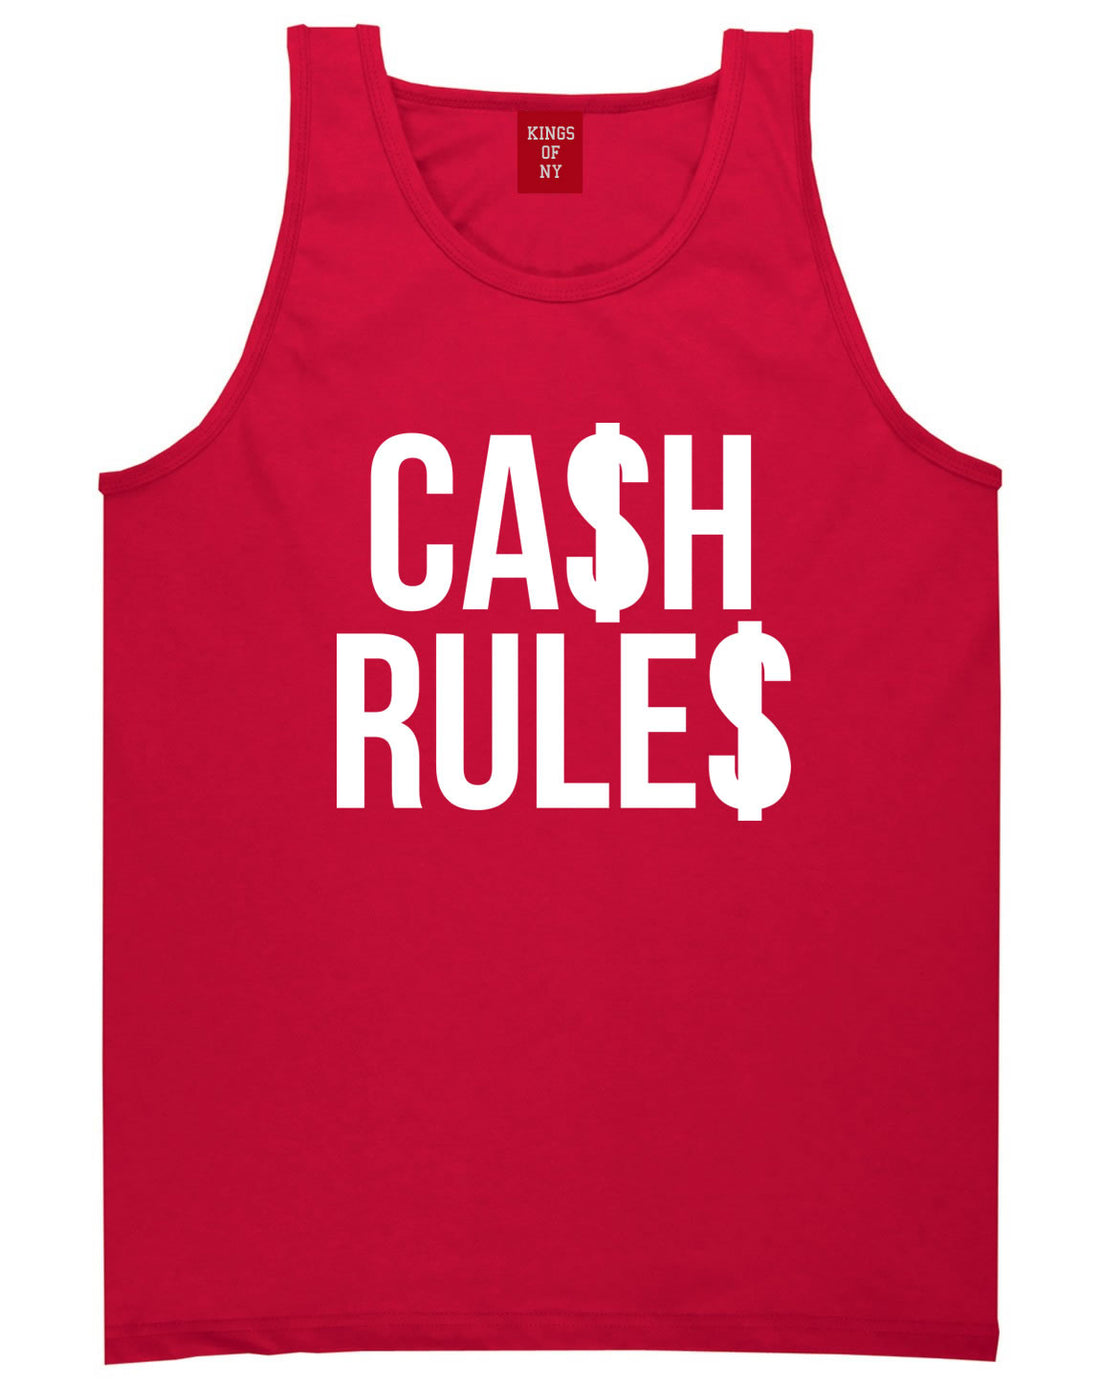 Cash Rules Tank Top in Red by Kings Of NY